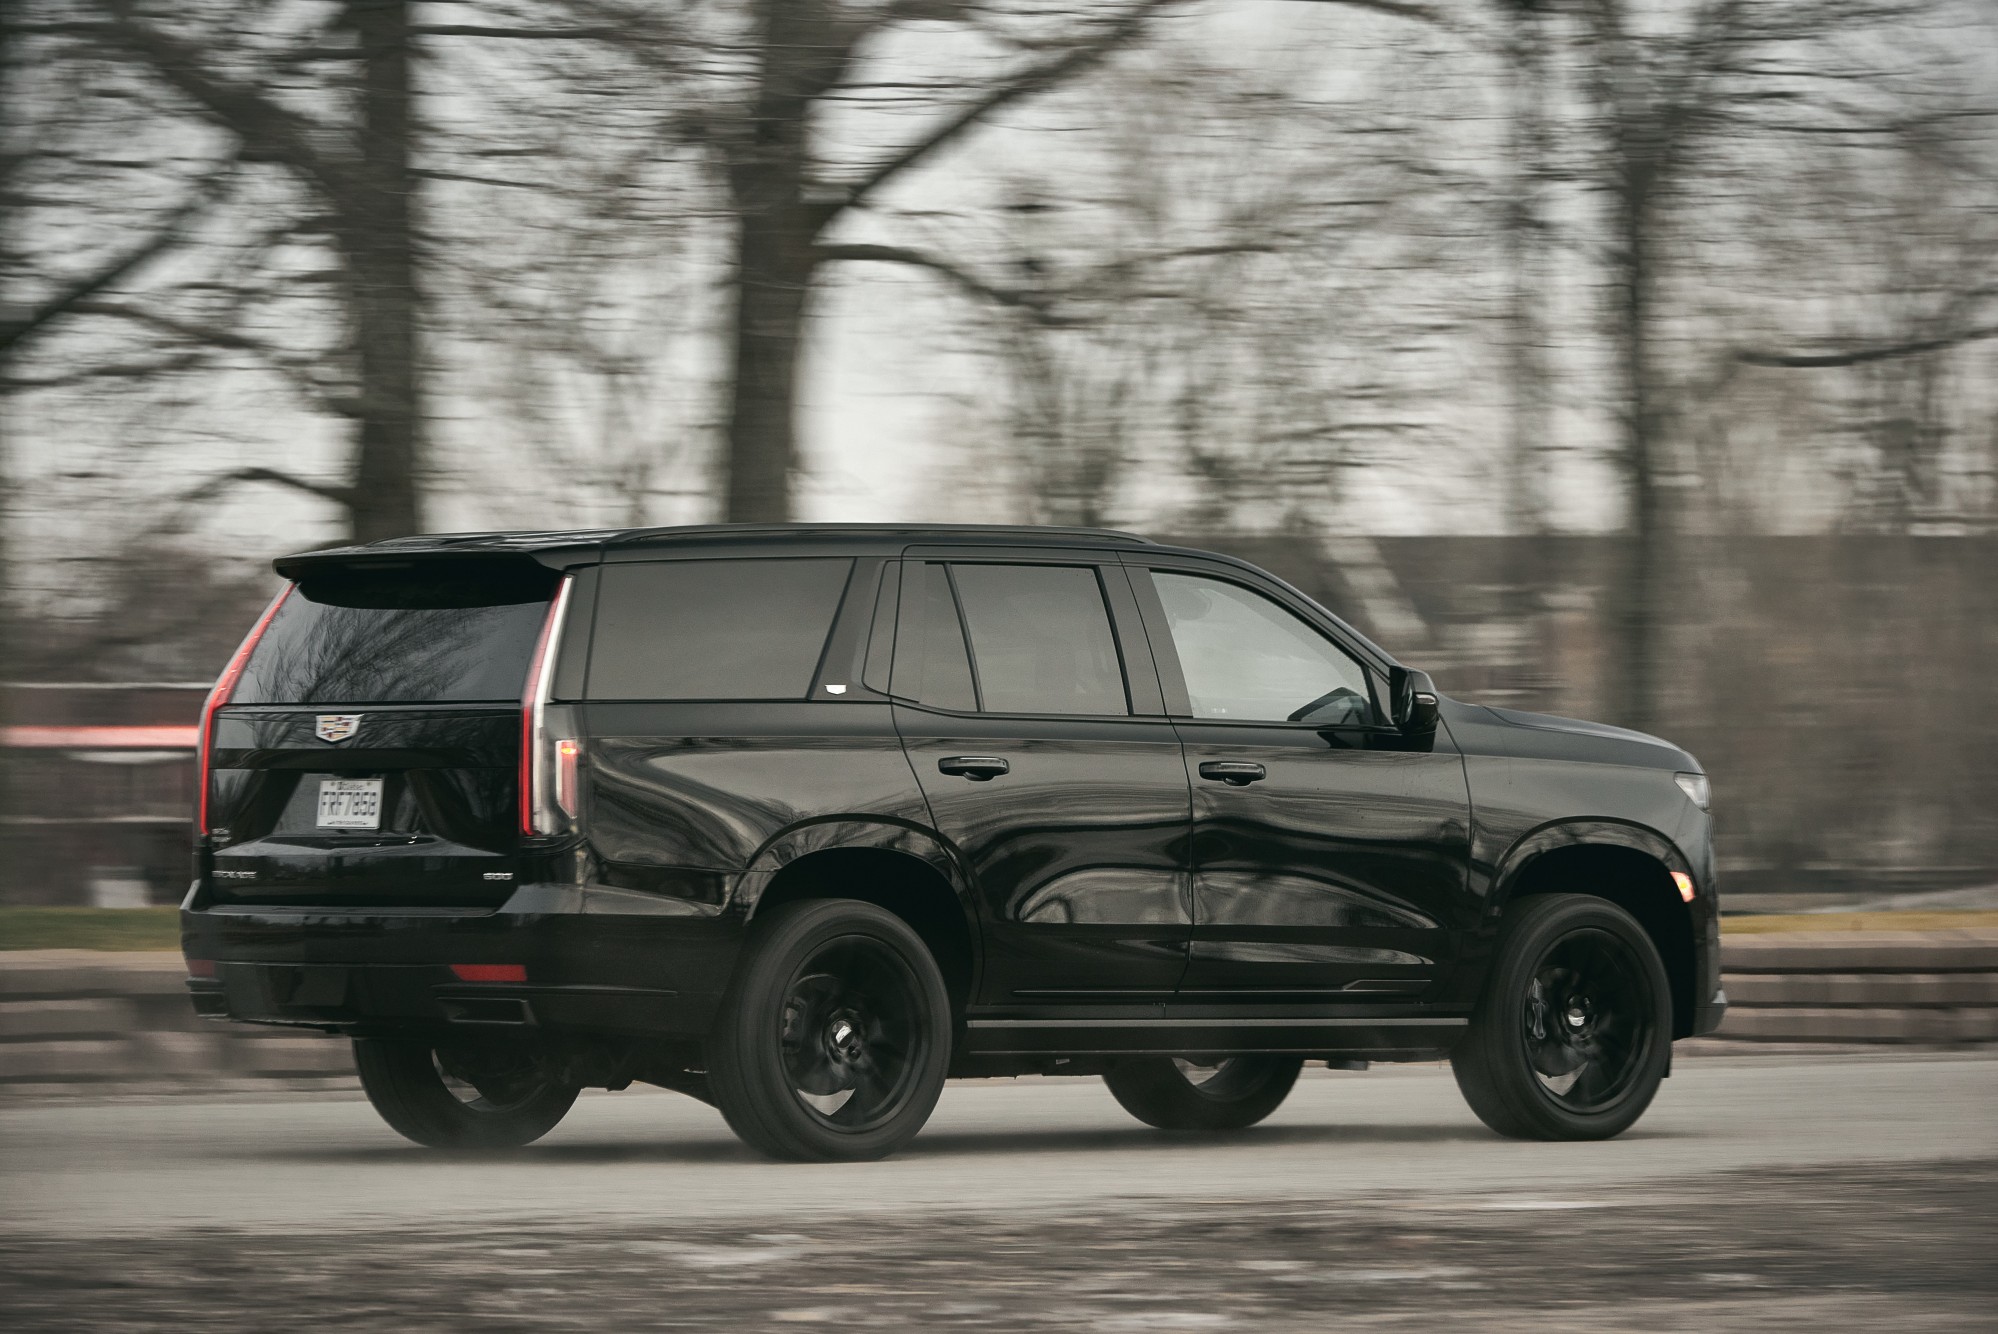 2021 Cadillac Escalade Is Still The Undisputed King Of SUVs